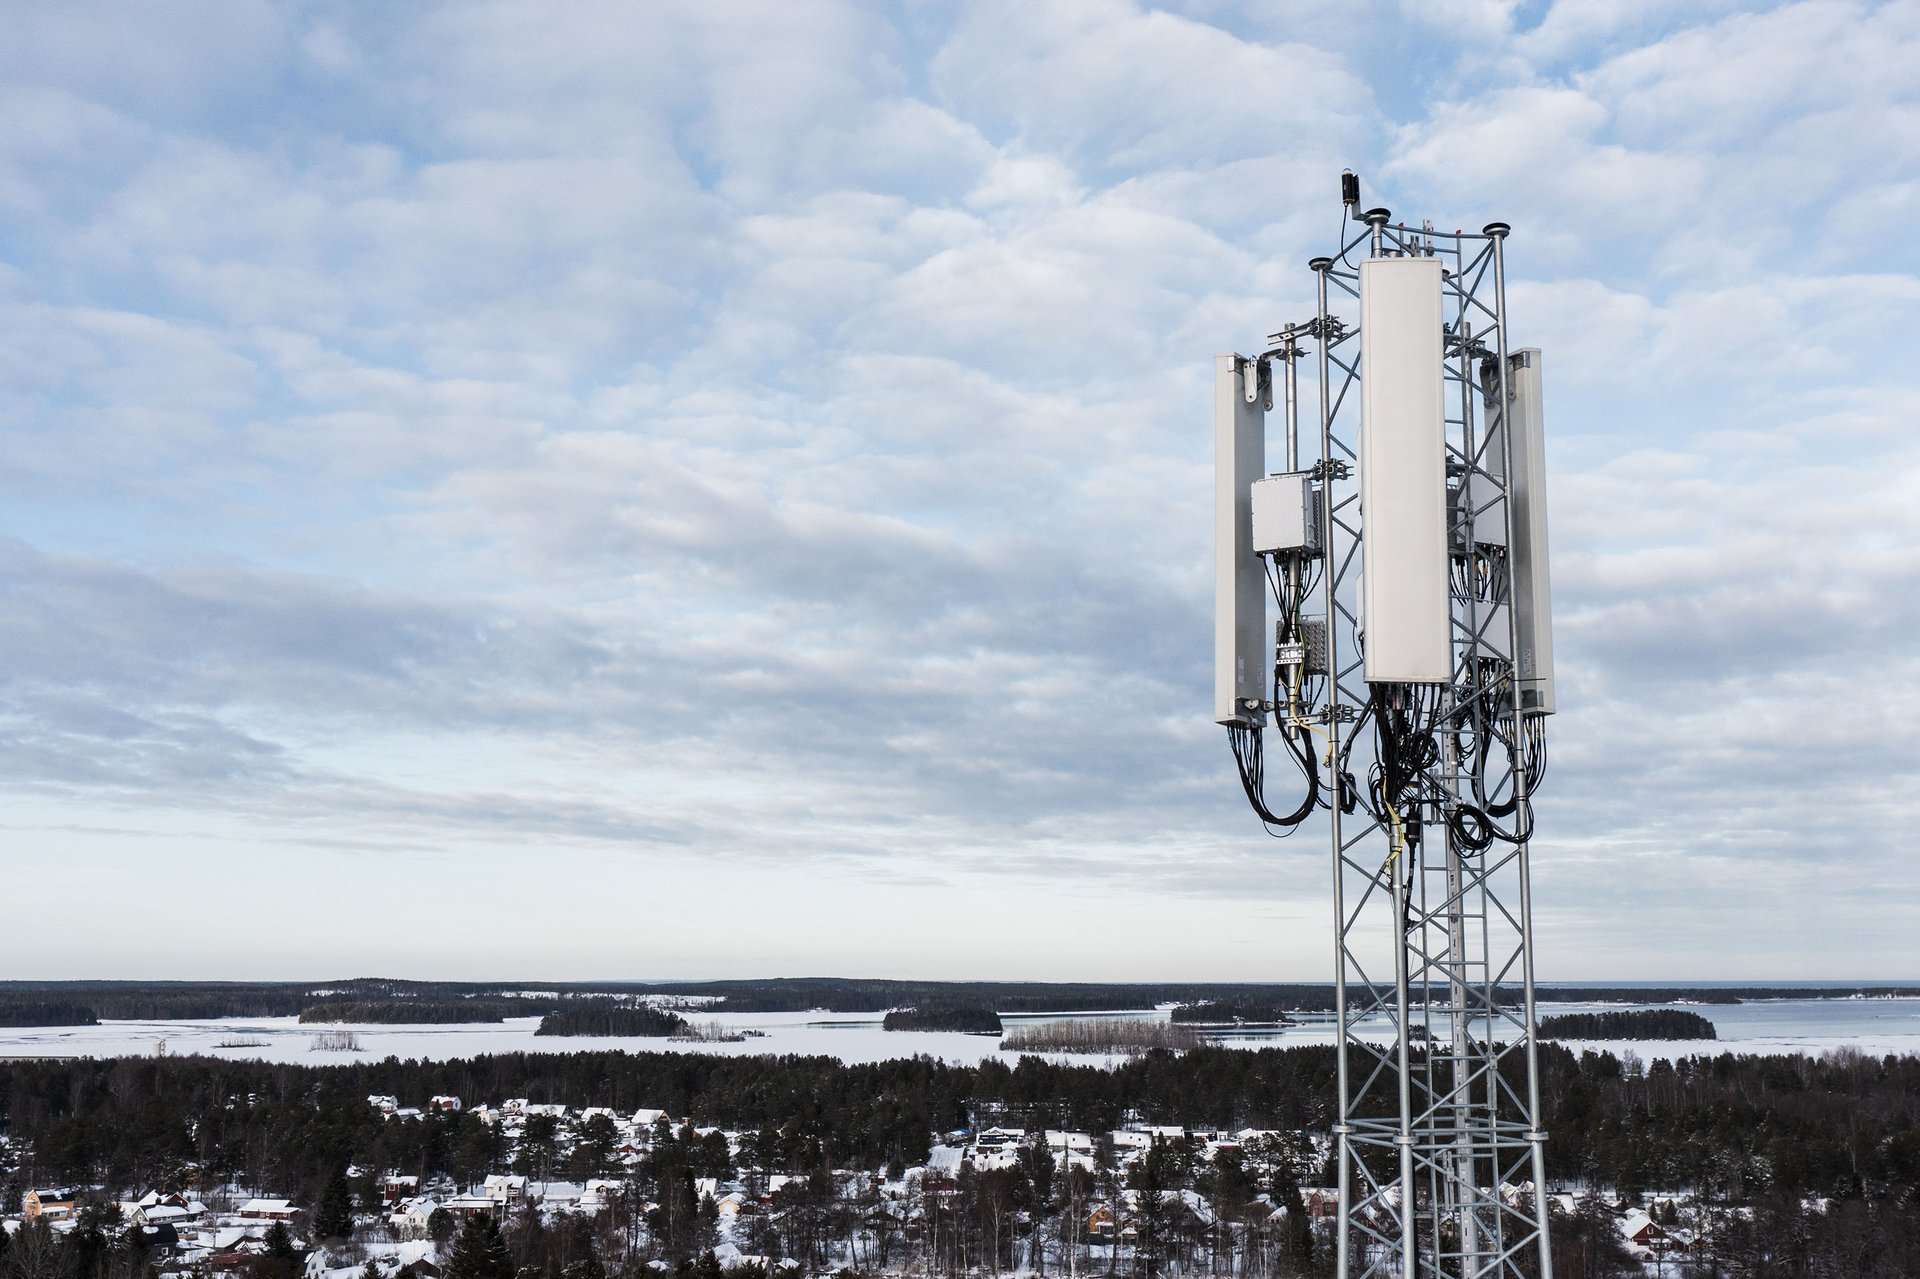 This is a tall cell tower with antennas and equipment. It stands in a snowy landscape with scattered buildings and water bodies.